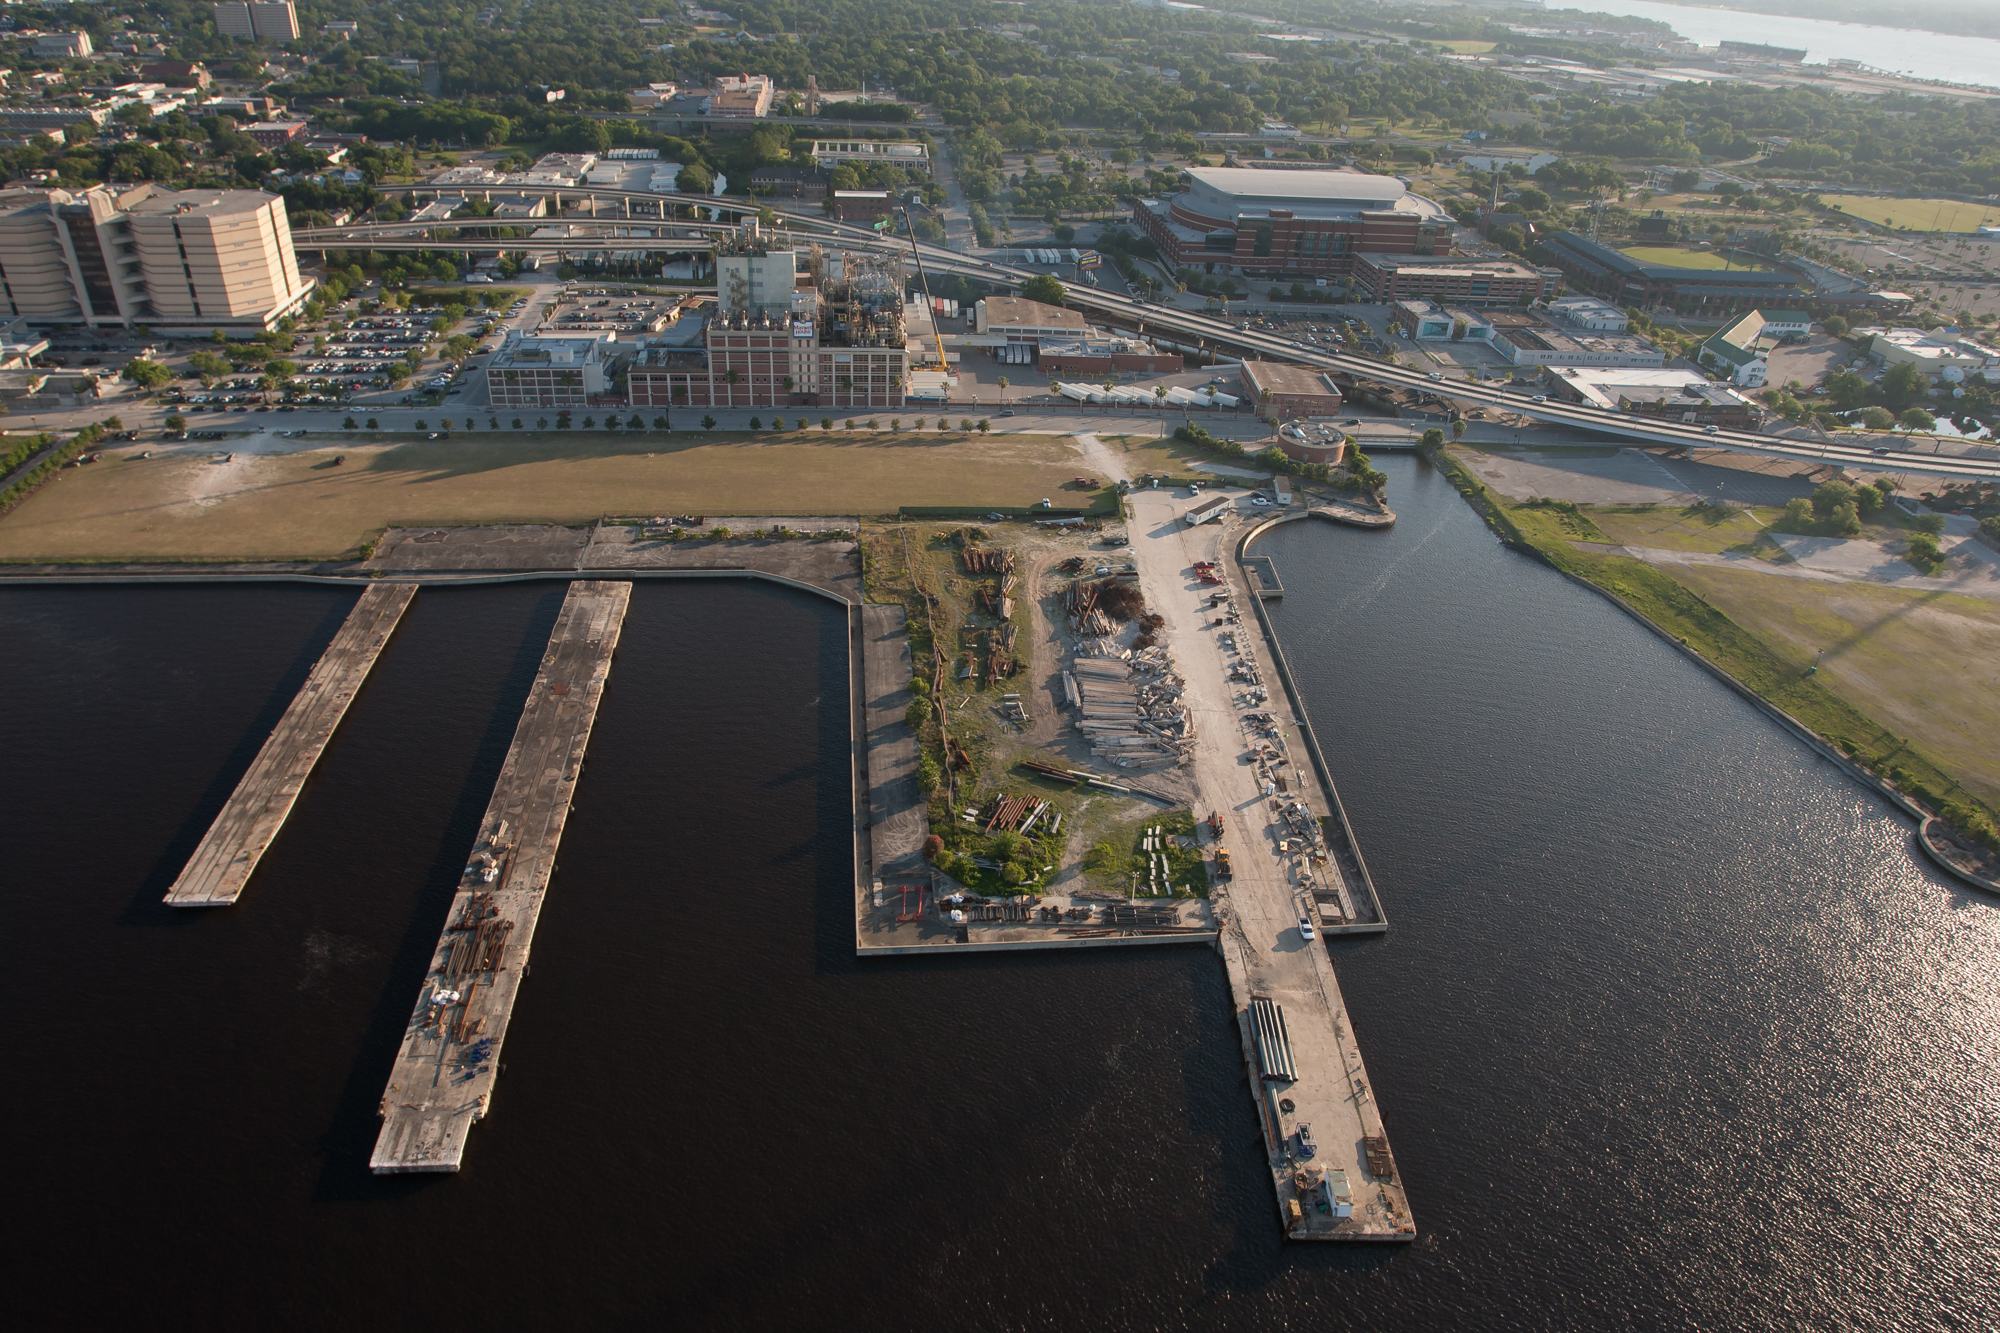 MOSH wants to find a new home on the21.7-acre Shipyards West parcel.